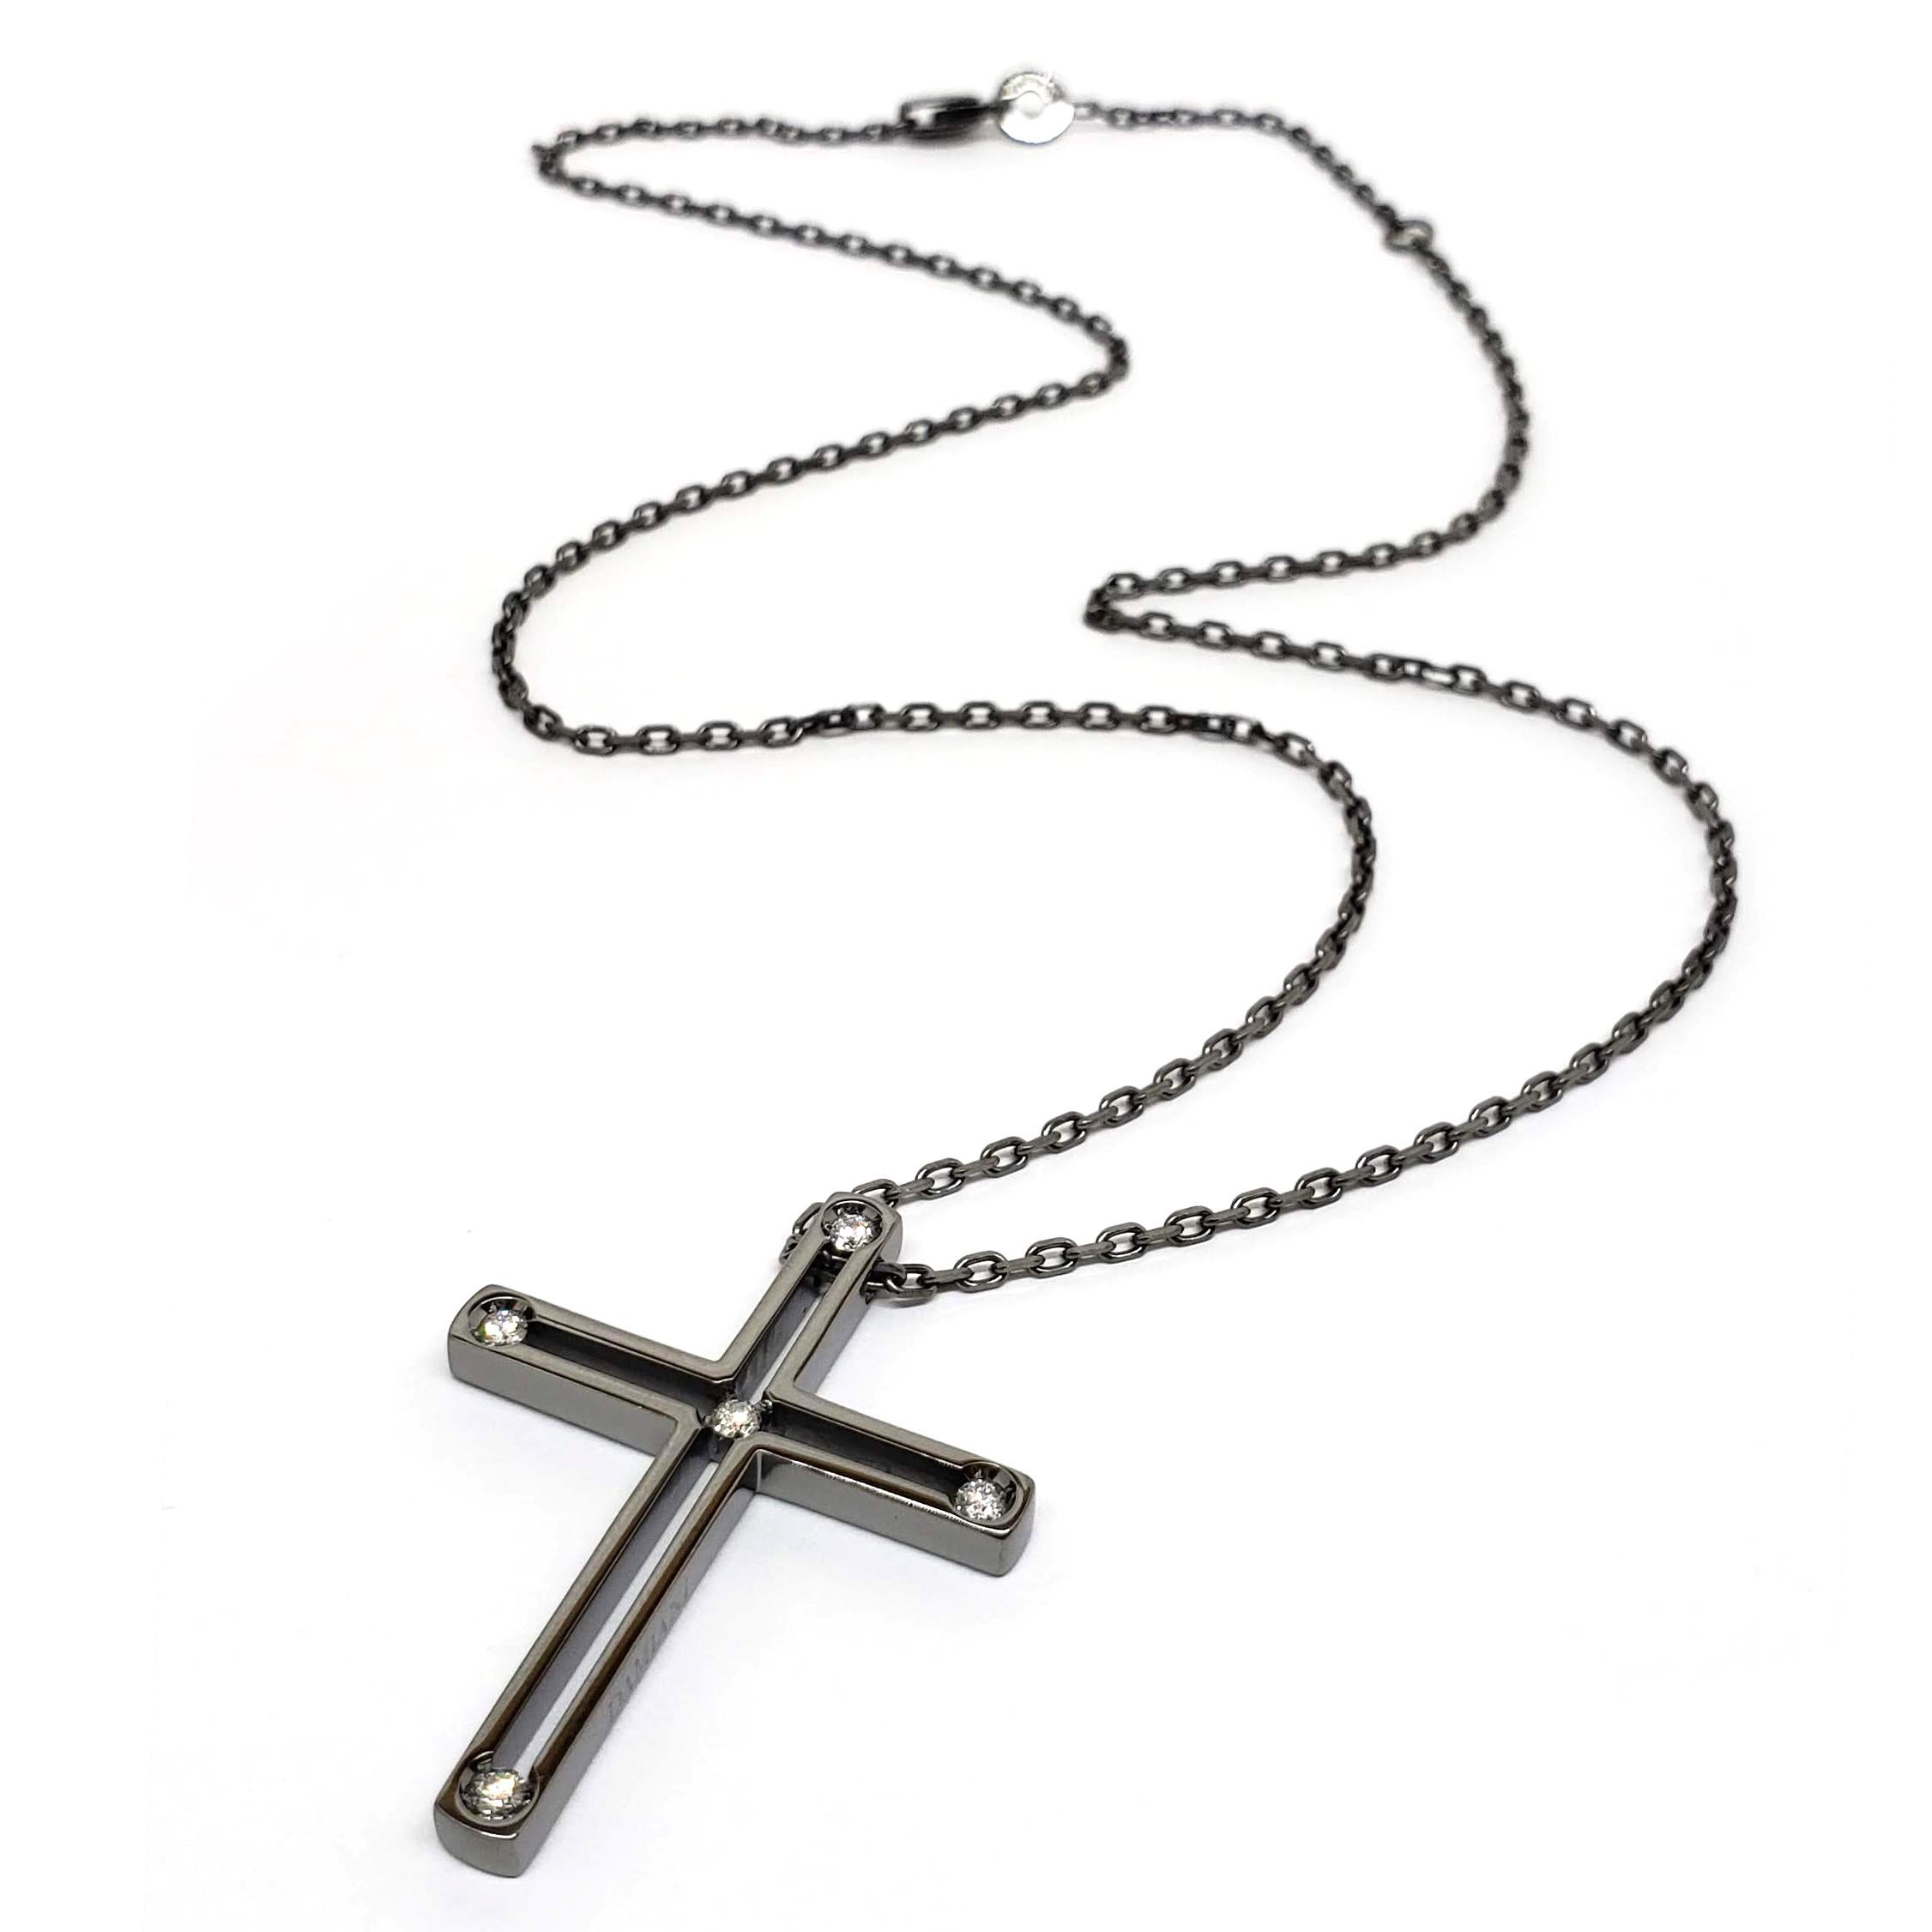 Damiani Black Cross Pendant 20031604 – Damiani is an Italian Jewelry company founded in 1924 by Enrico Grassi Damiani in Valenza, Italy. Damiani was the first company to introduce Certificates of Authenticity for jewelry pieces showing the details